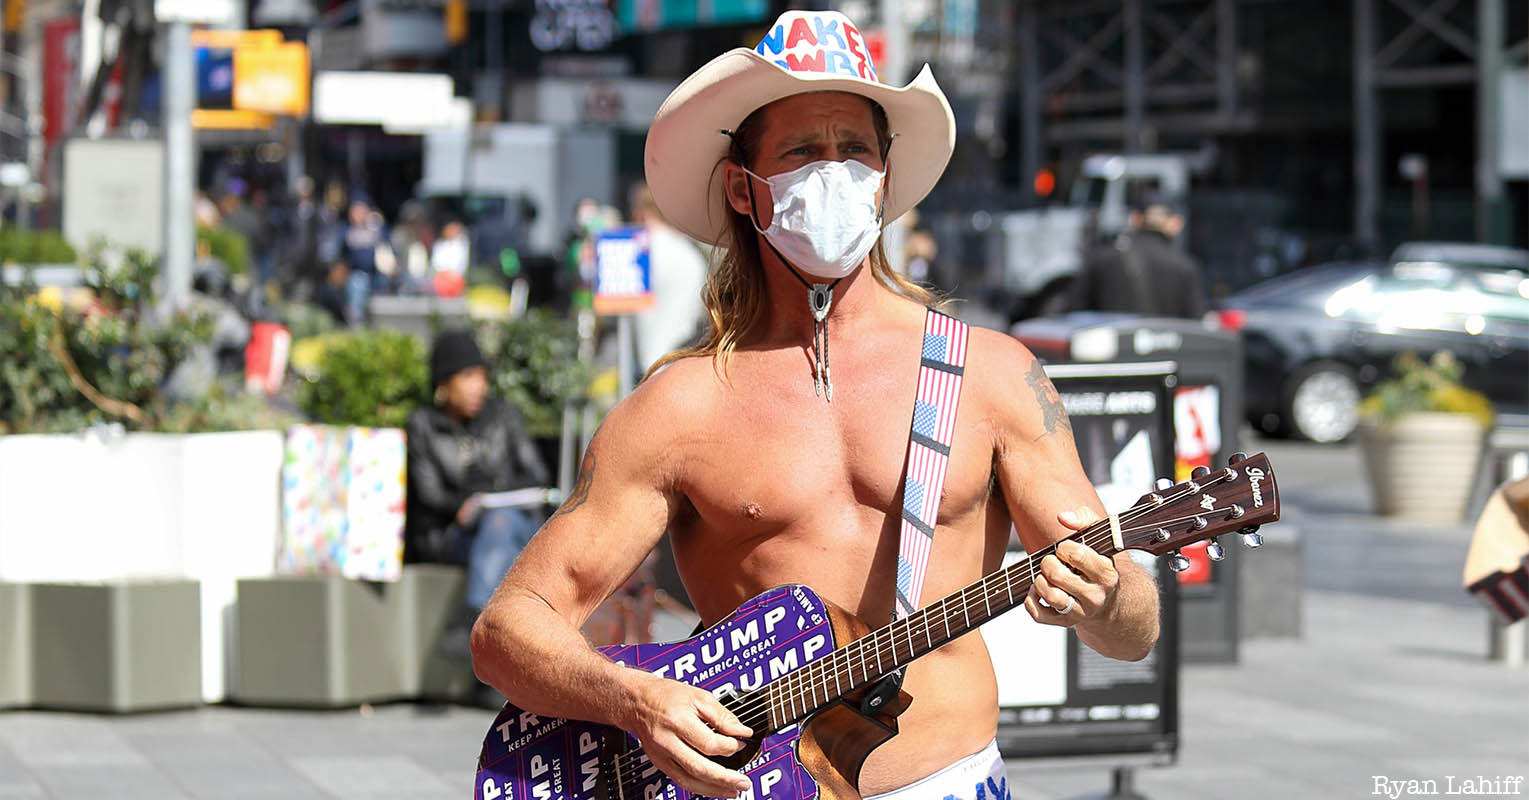 Naked Cowboy with face mask